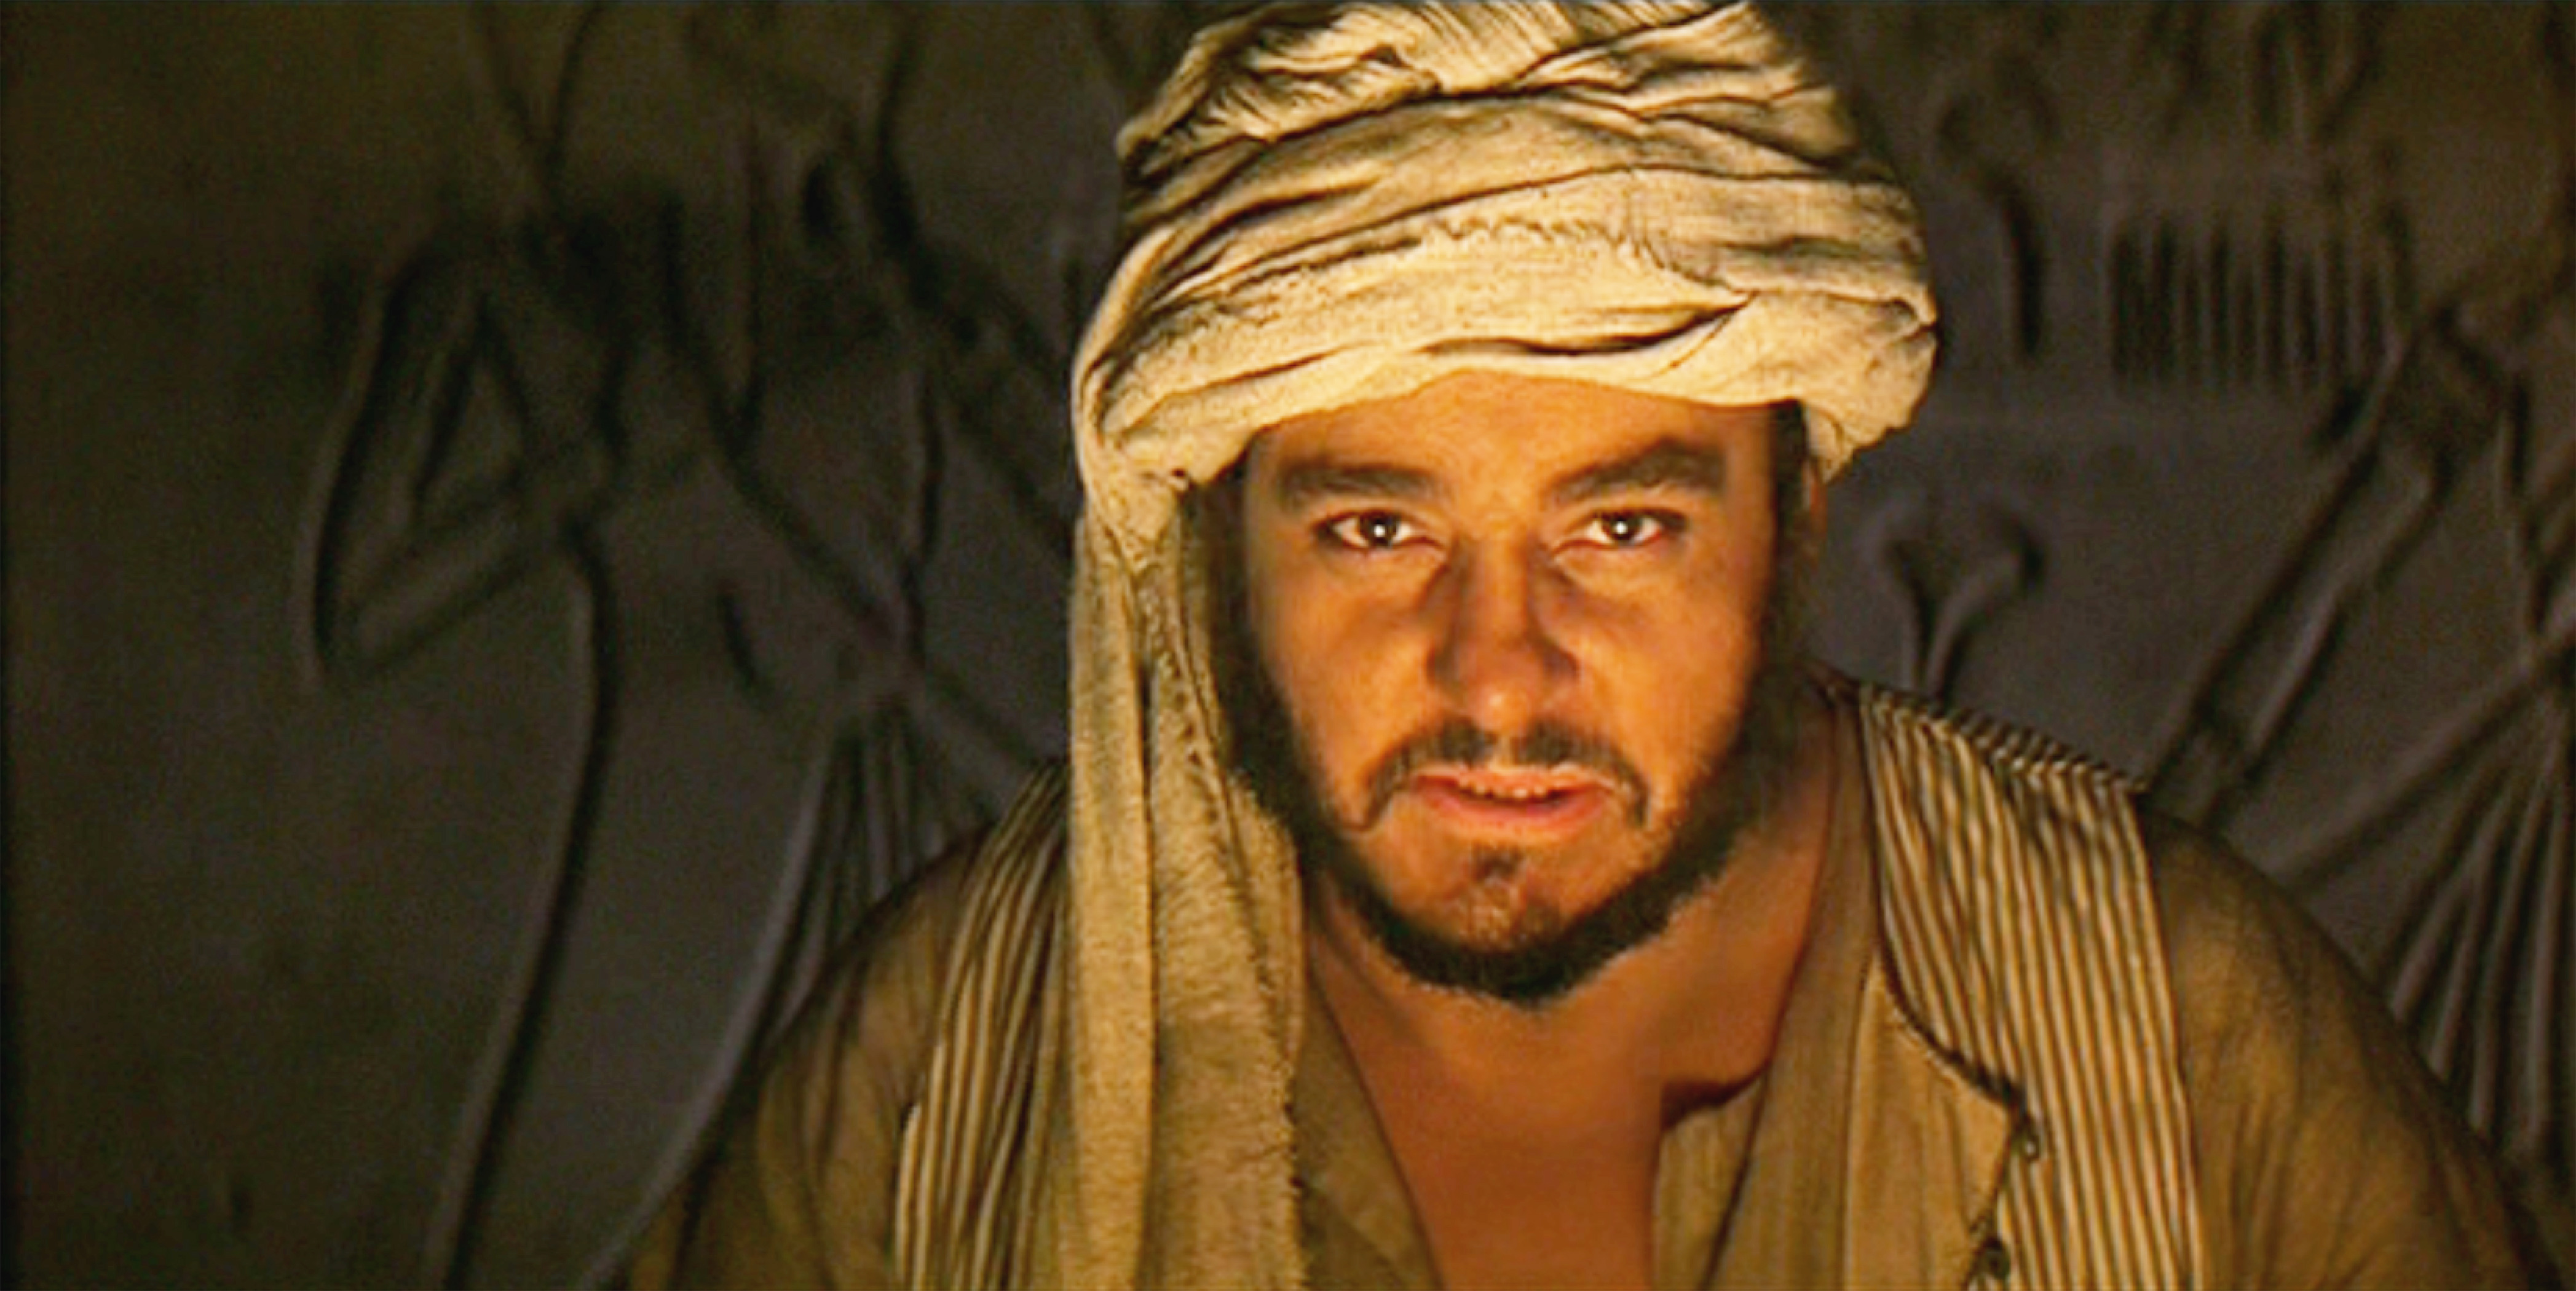 John Rhys-Davies as Sallah in "Indiana Jones and the Raiders of the Lost Ark," released on June 12, 1981. | Source: Getty Images